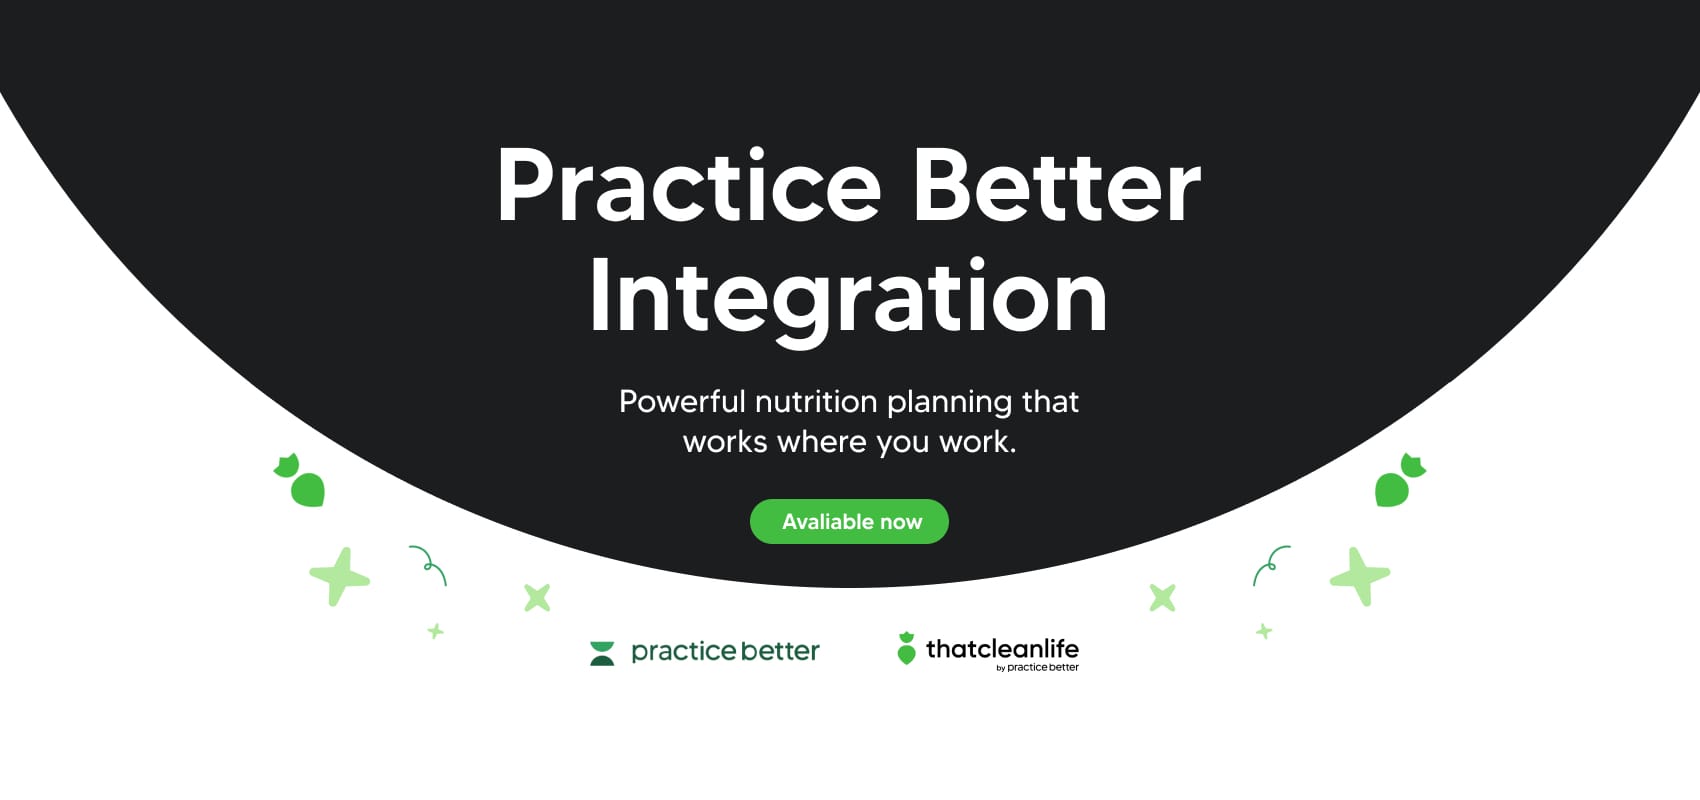 Introducing That Clean Life's Integration with Practice Better